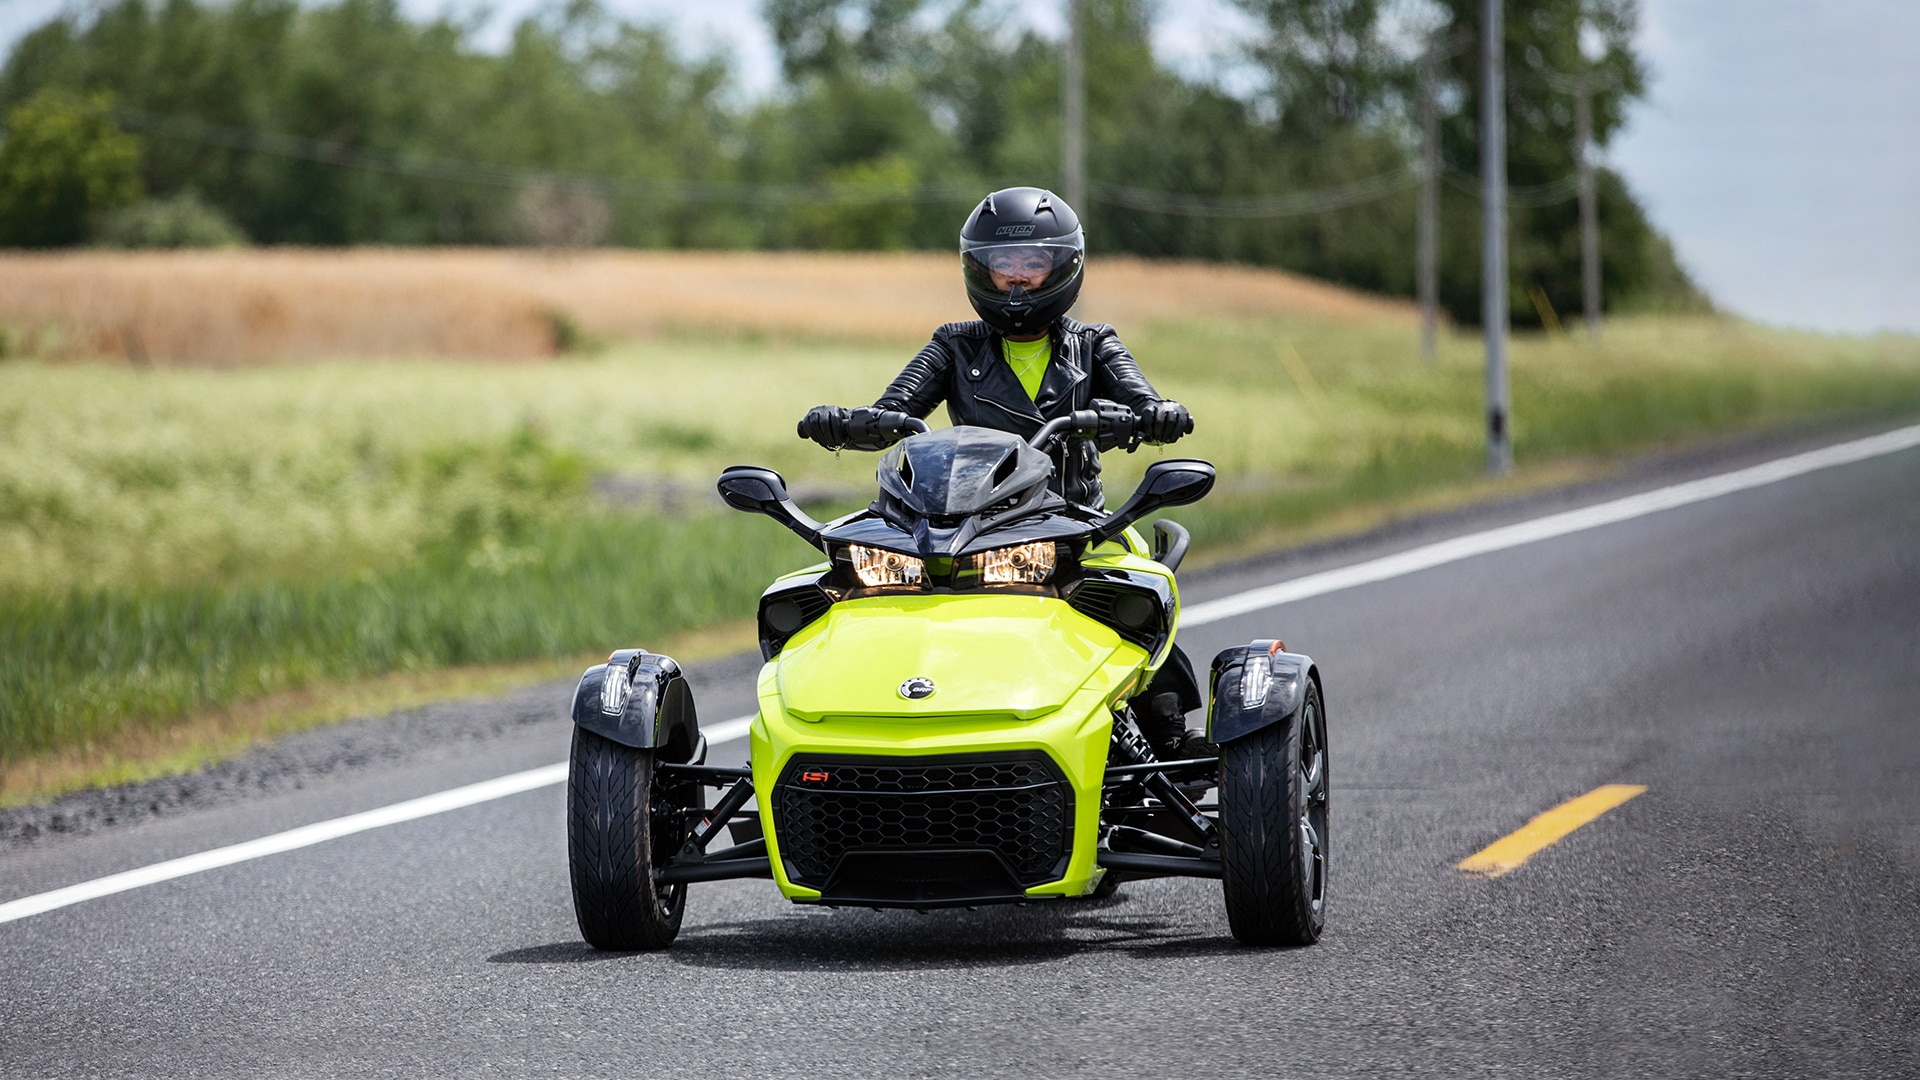 Rider driving a 2022 yellow Can-Am Spyder F3 3-wheel vehicle